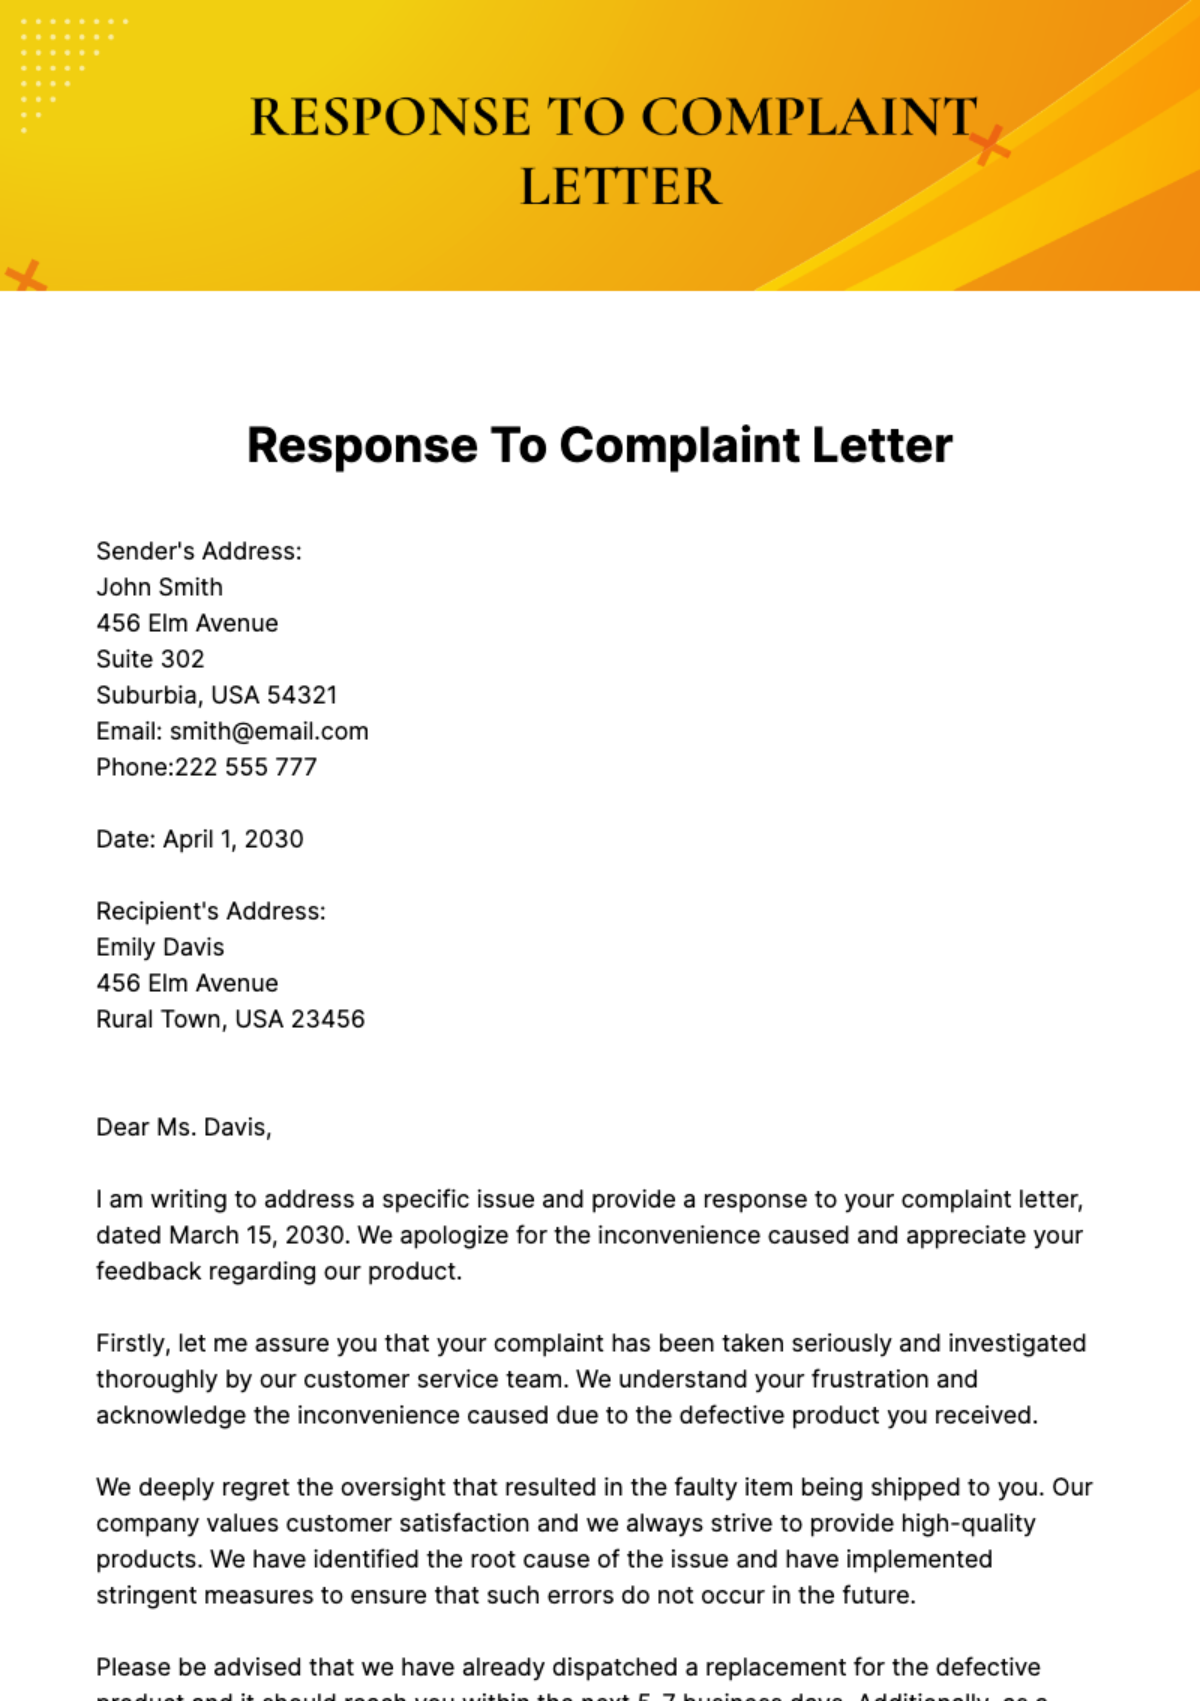 Response To Complaint Letter Template